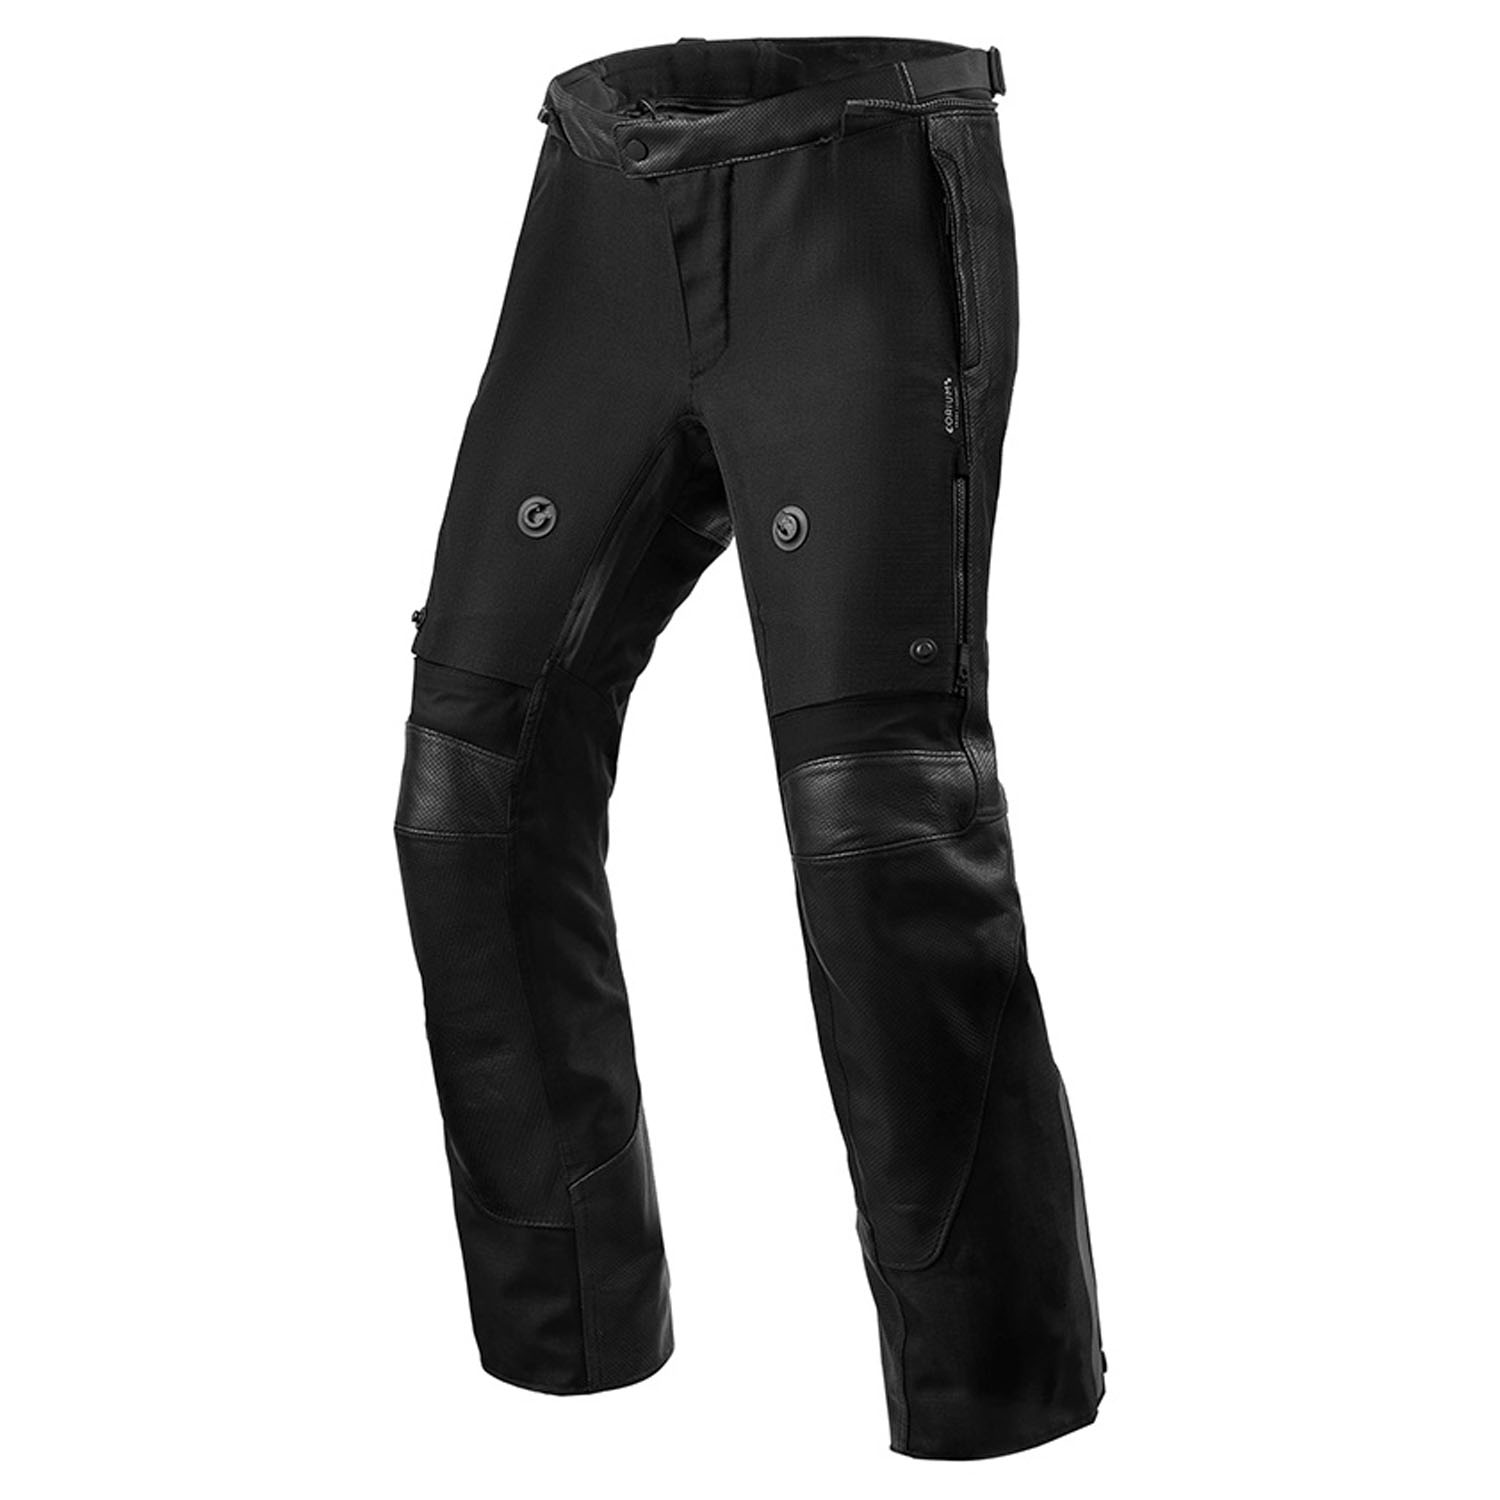 Image of REV'IT! Trousers Valve H2O Black Short Motorcycle Pants Size 50 ID 8700001315852